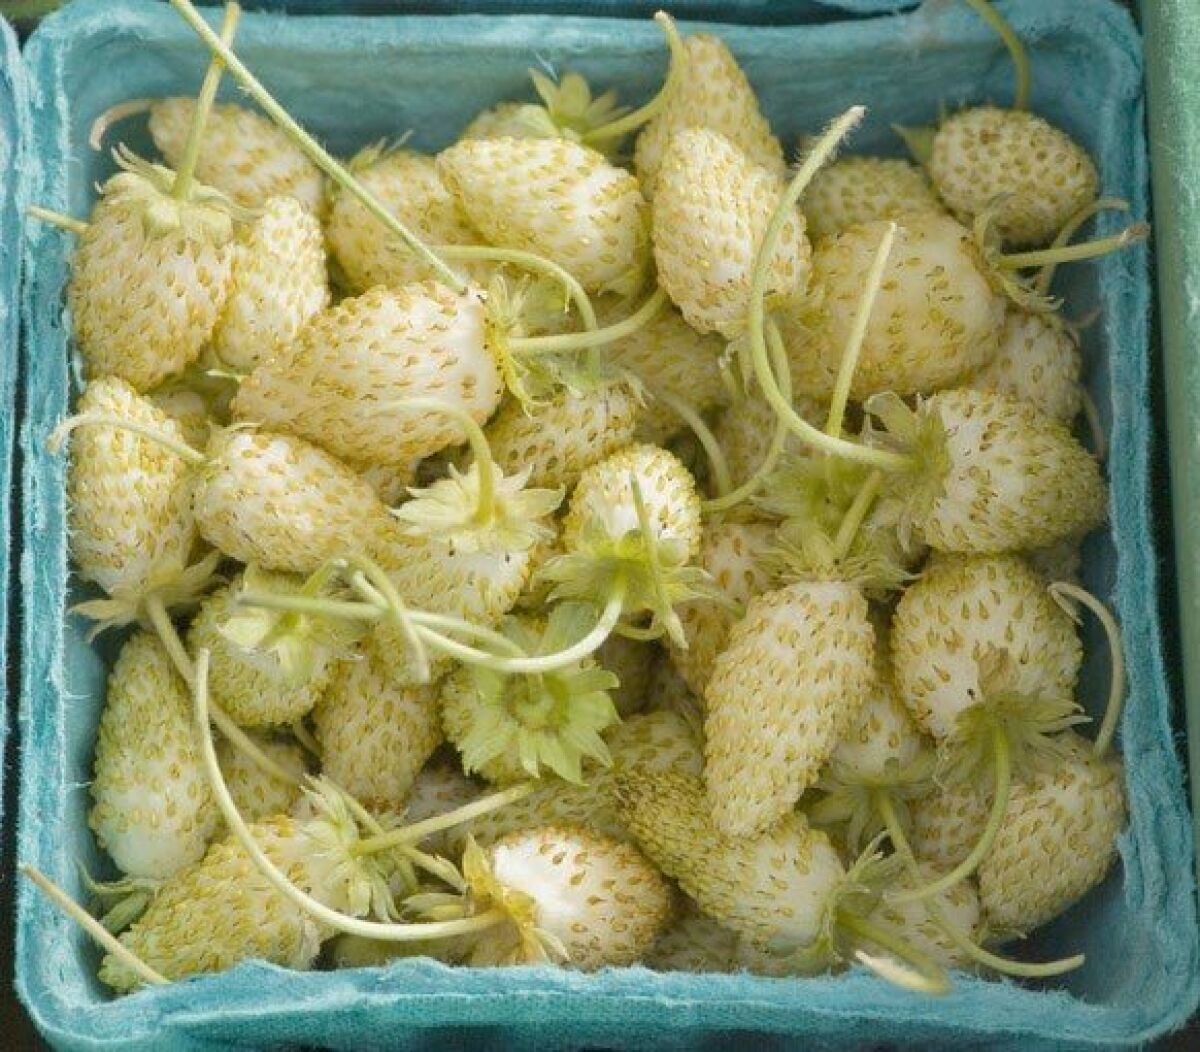 Wild strawberries grown by Pudwill Berry Farms in Nipomo at the Santa Monica farmers market.